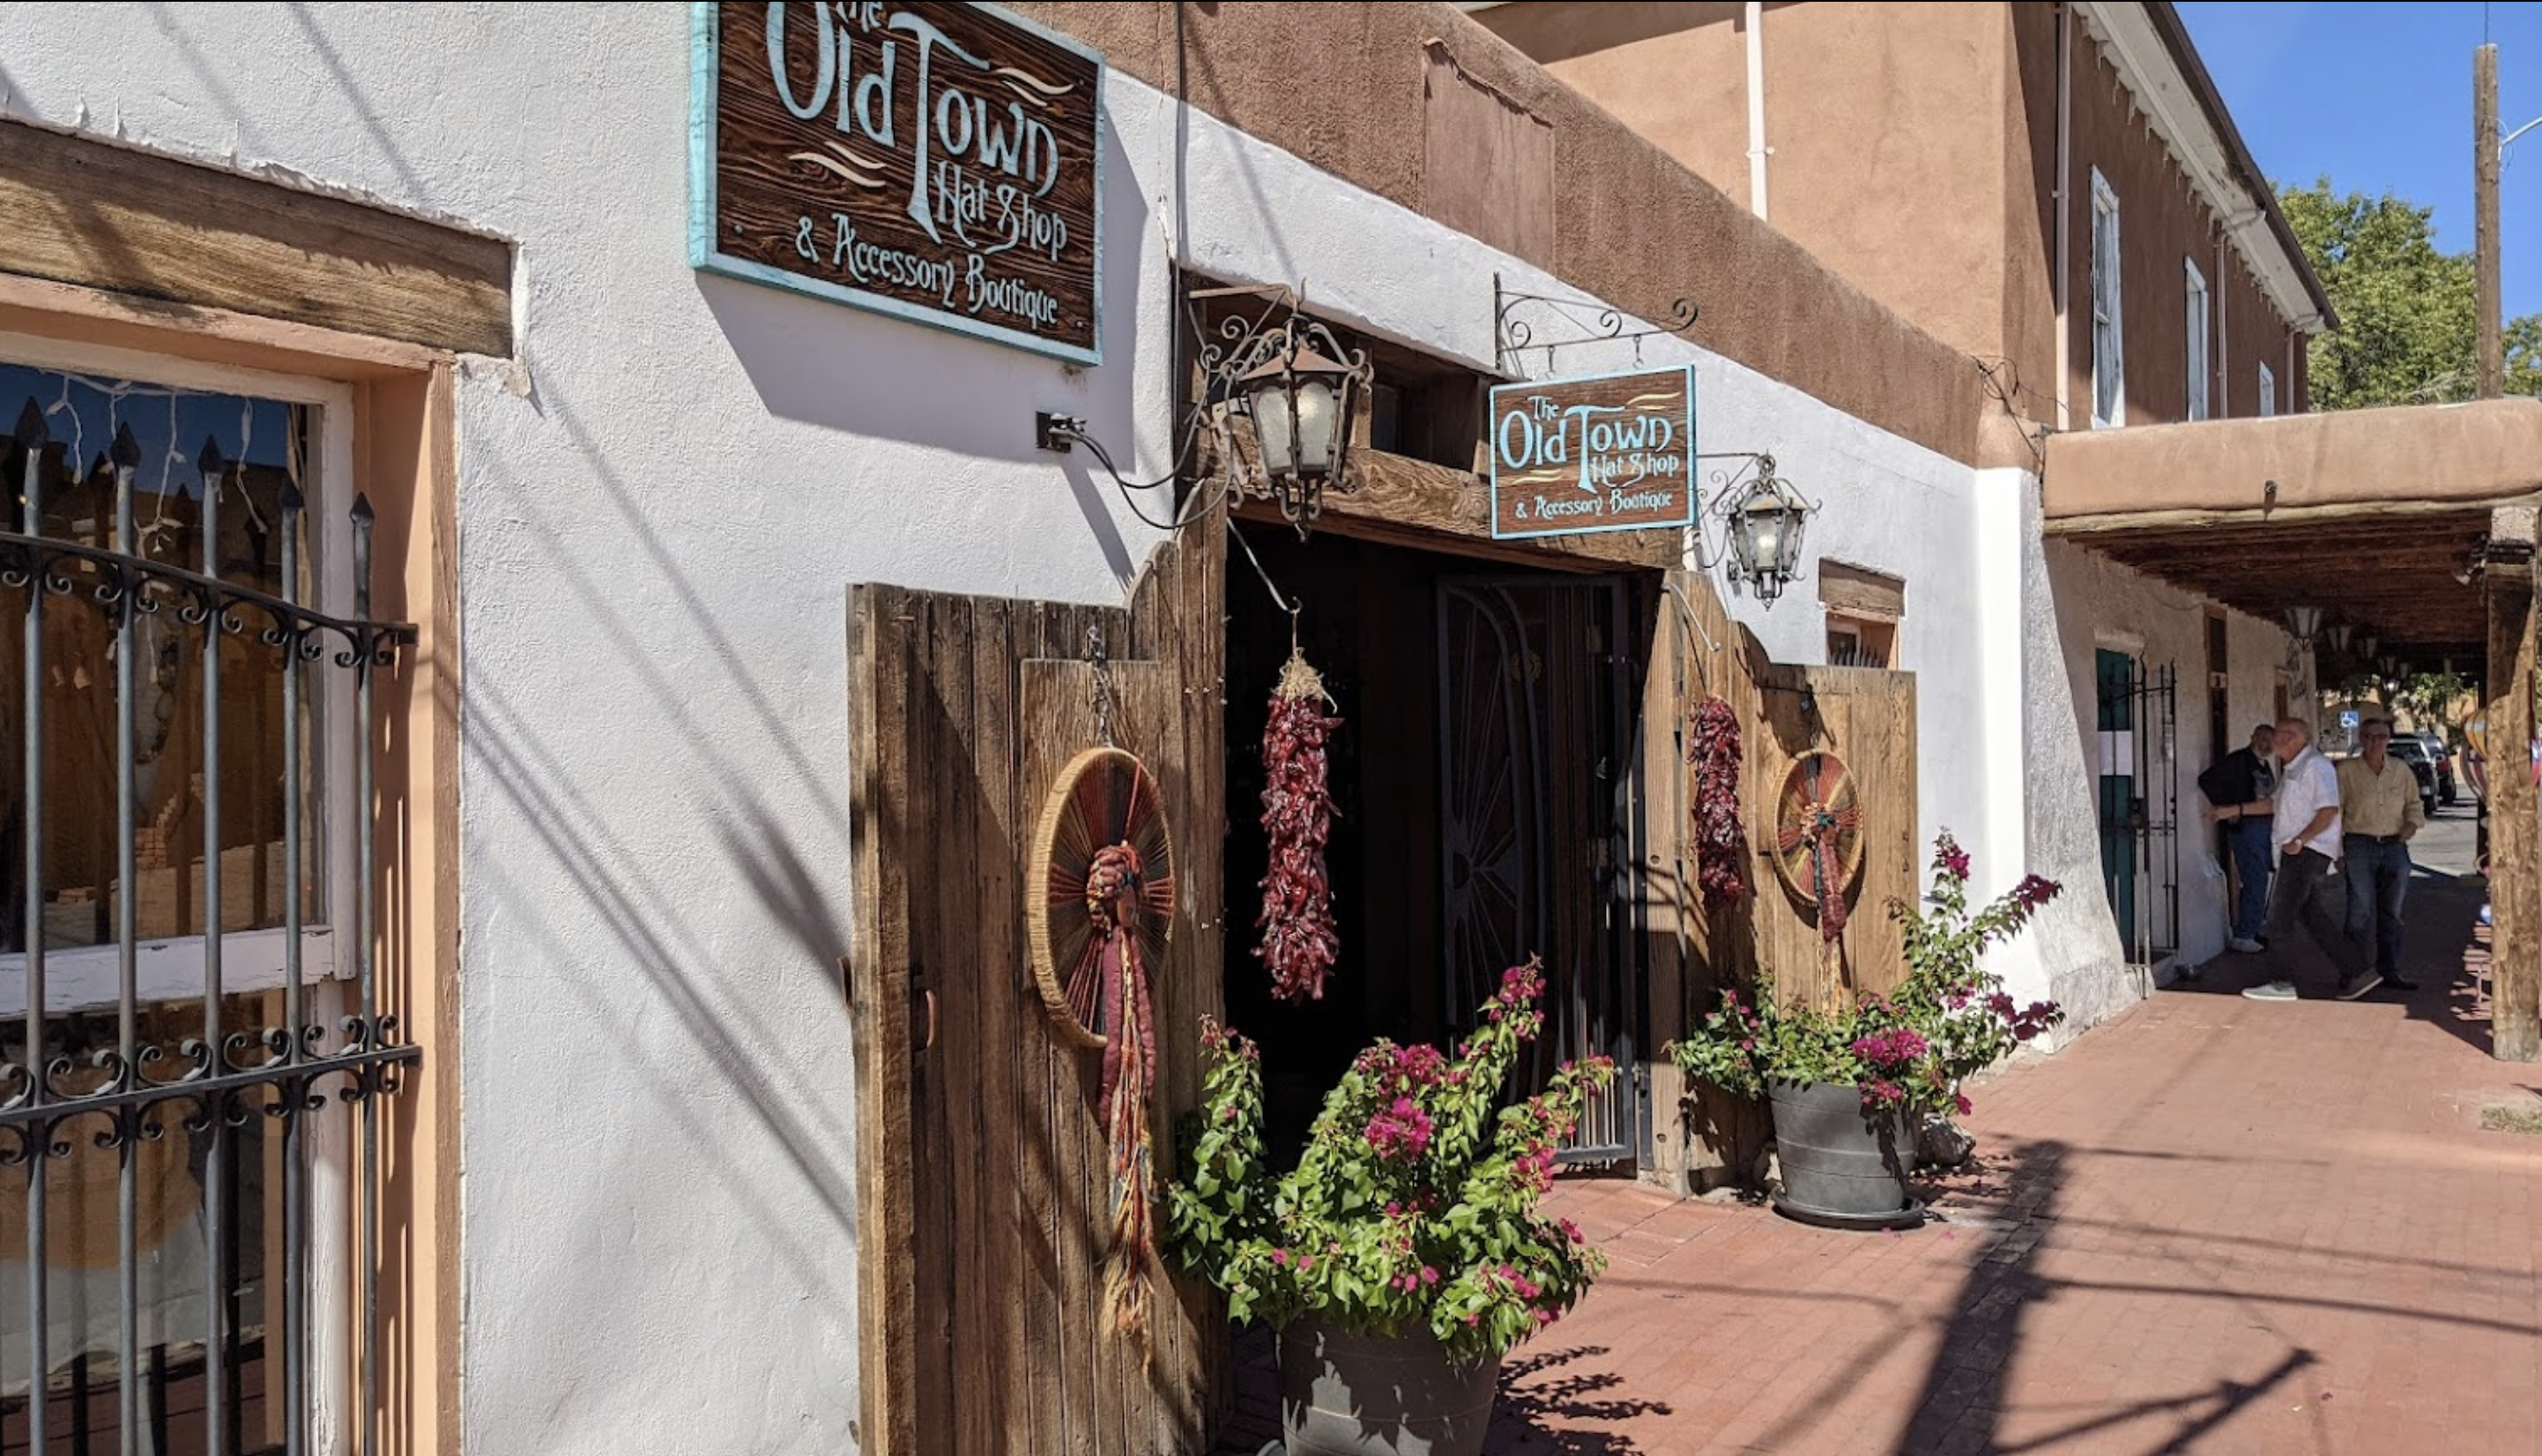 The Old Town Hat Shop & Accessory Boutique